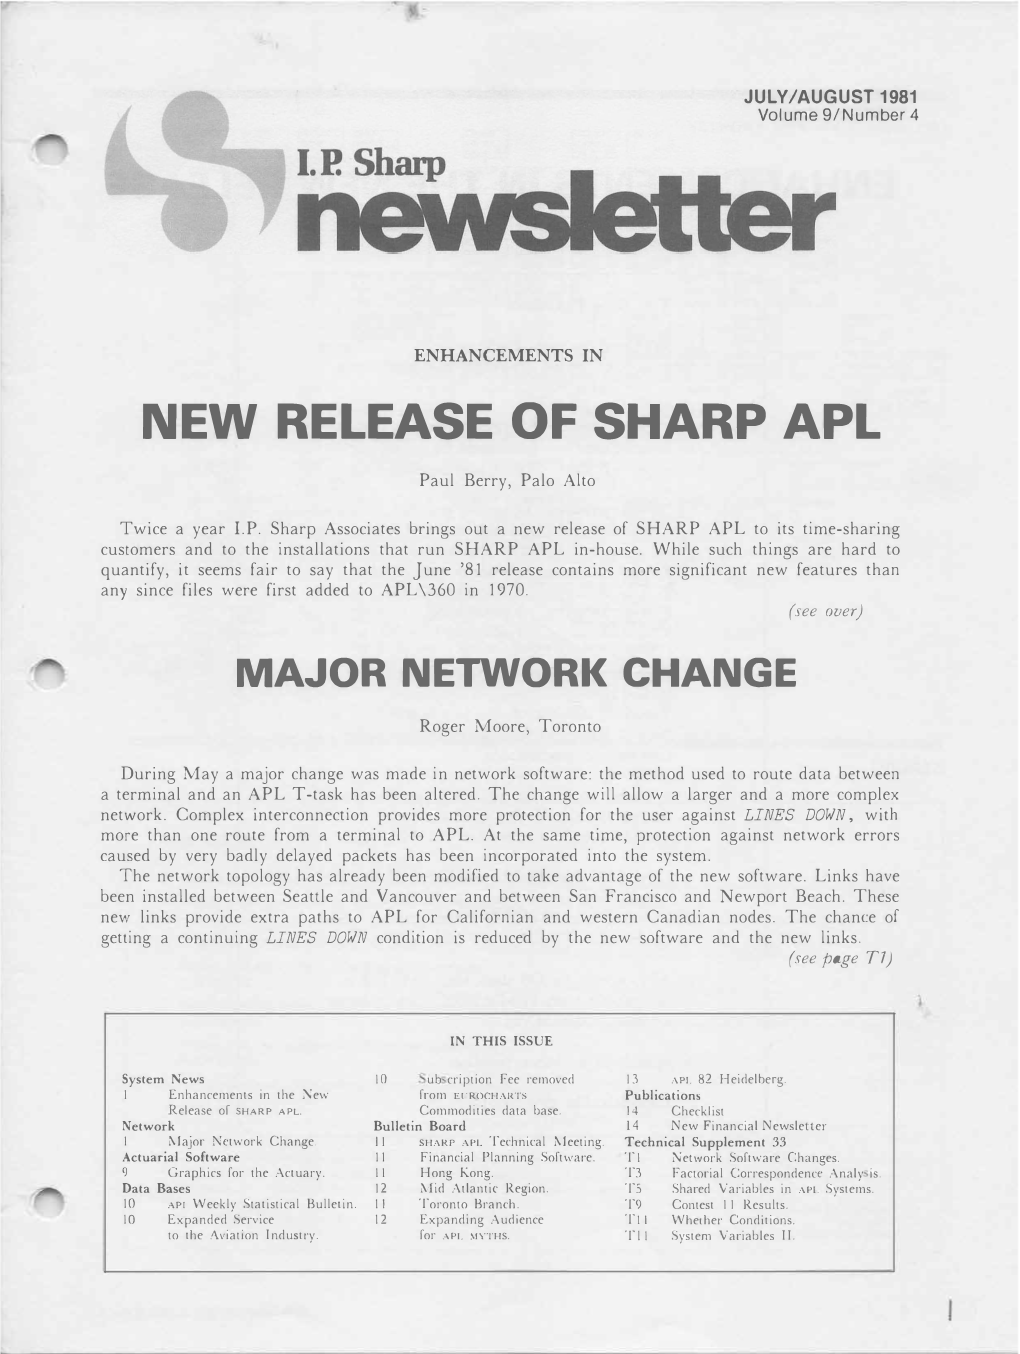 New Release of Sharp Apl